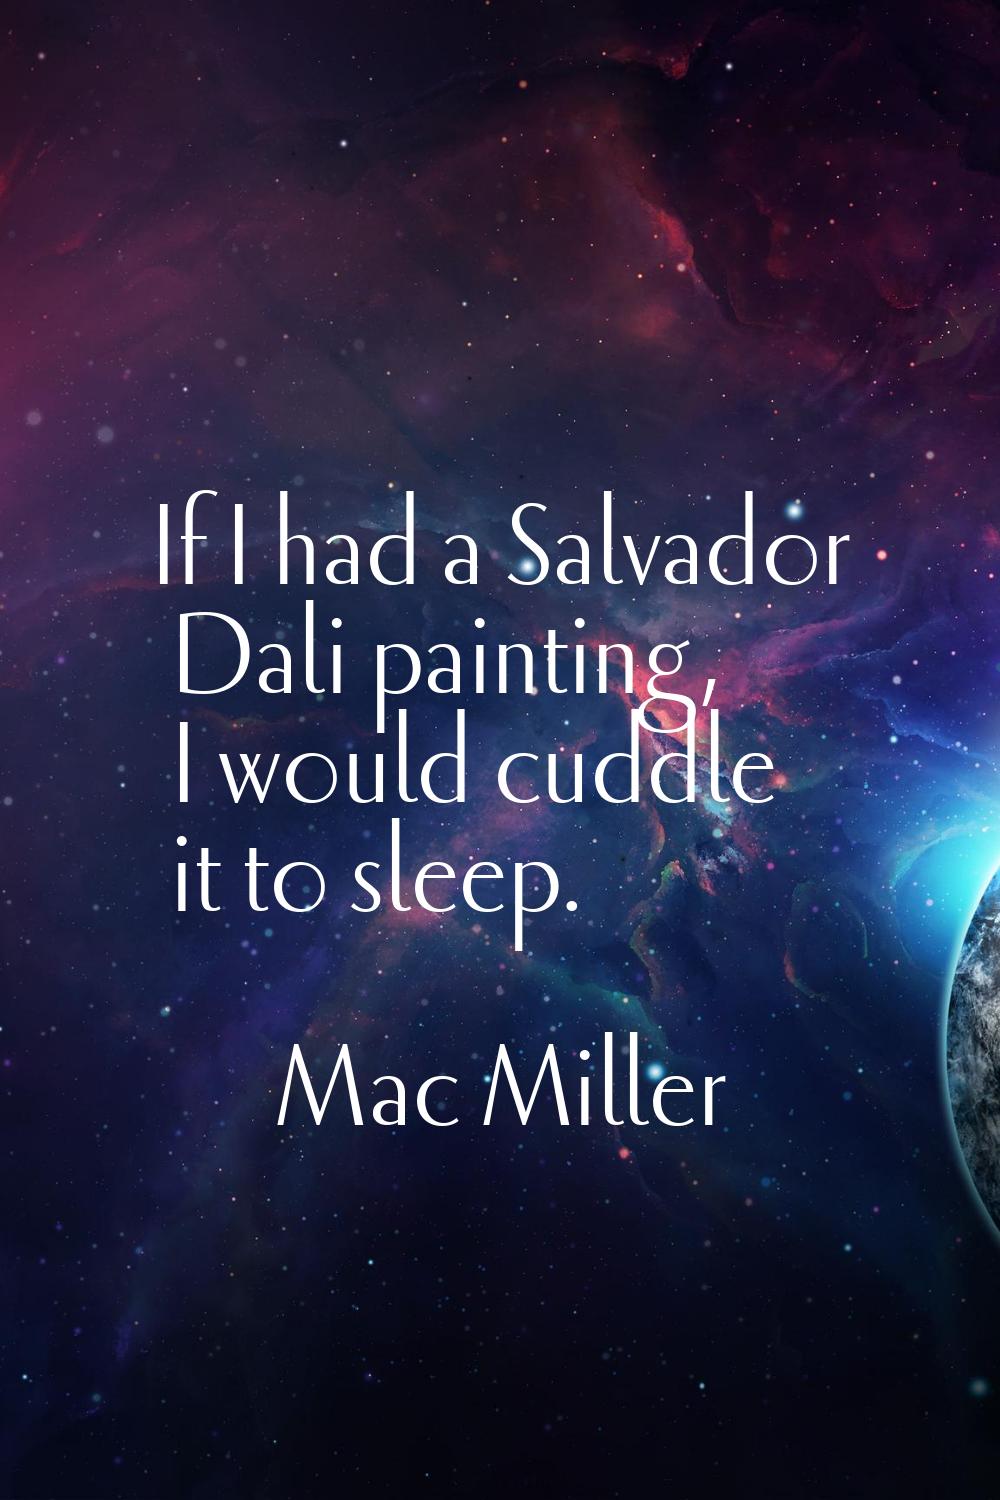 If I had a Salvador Dali painting, I would cuddle it to sleep.